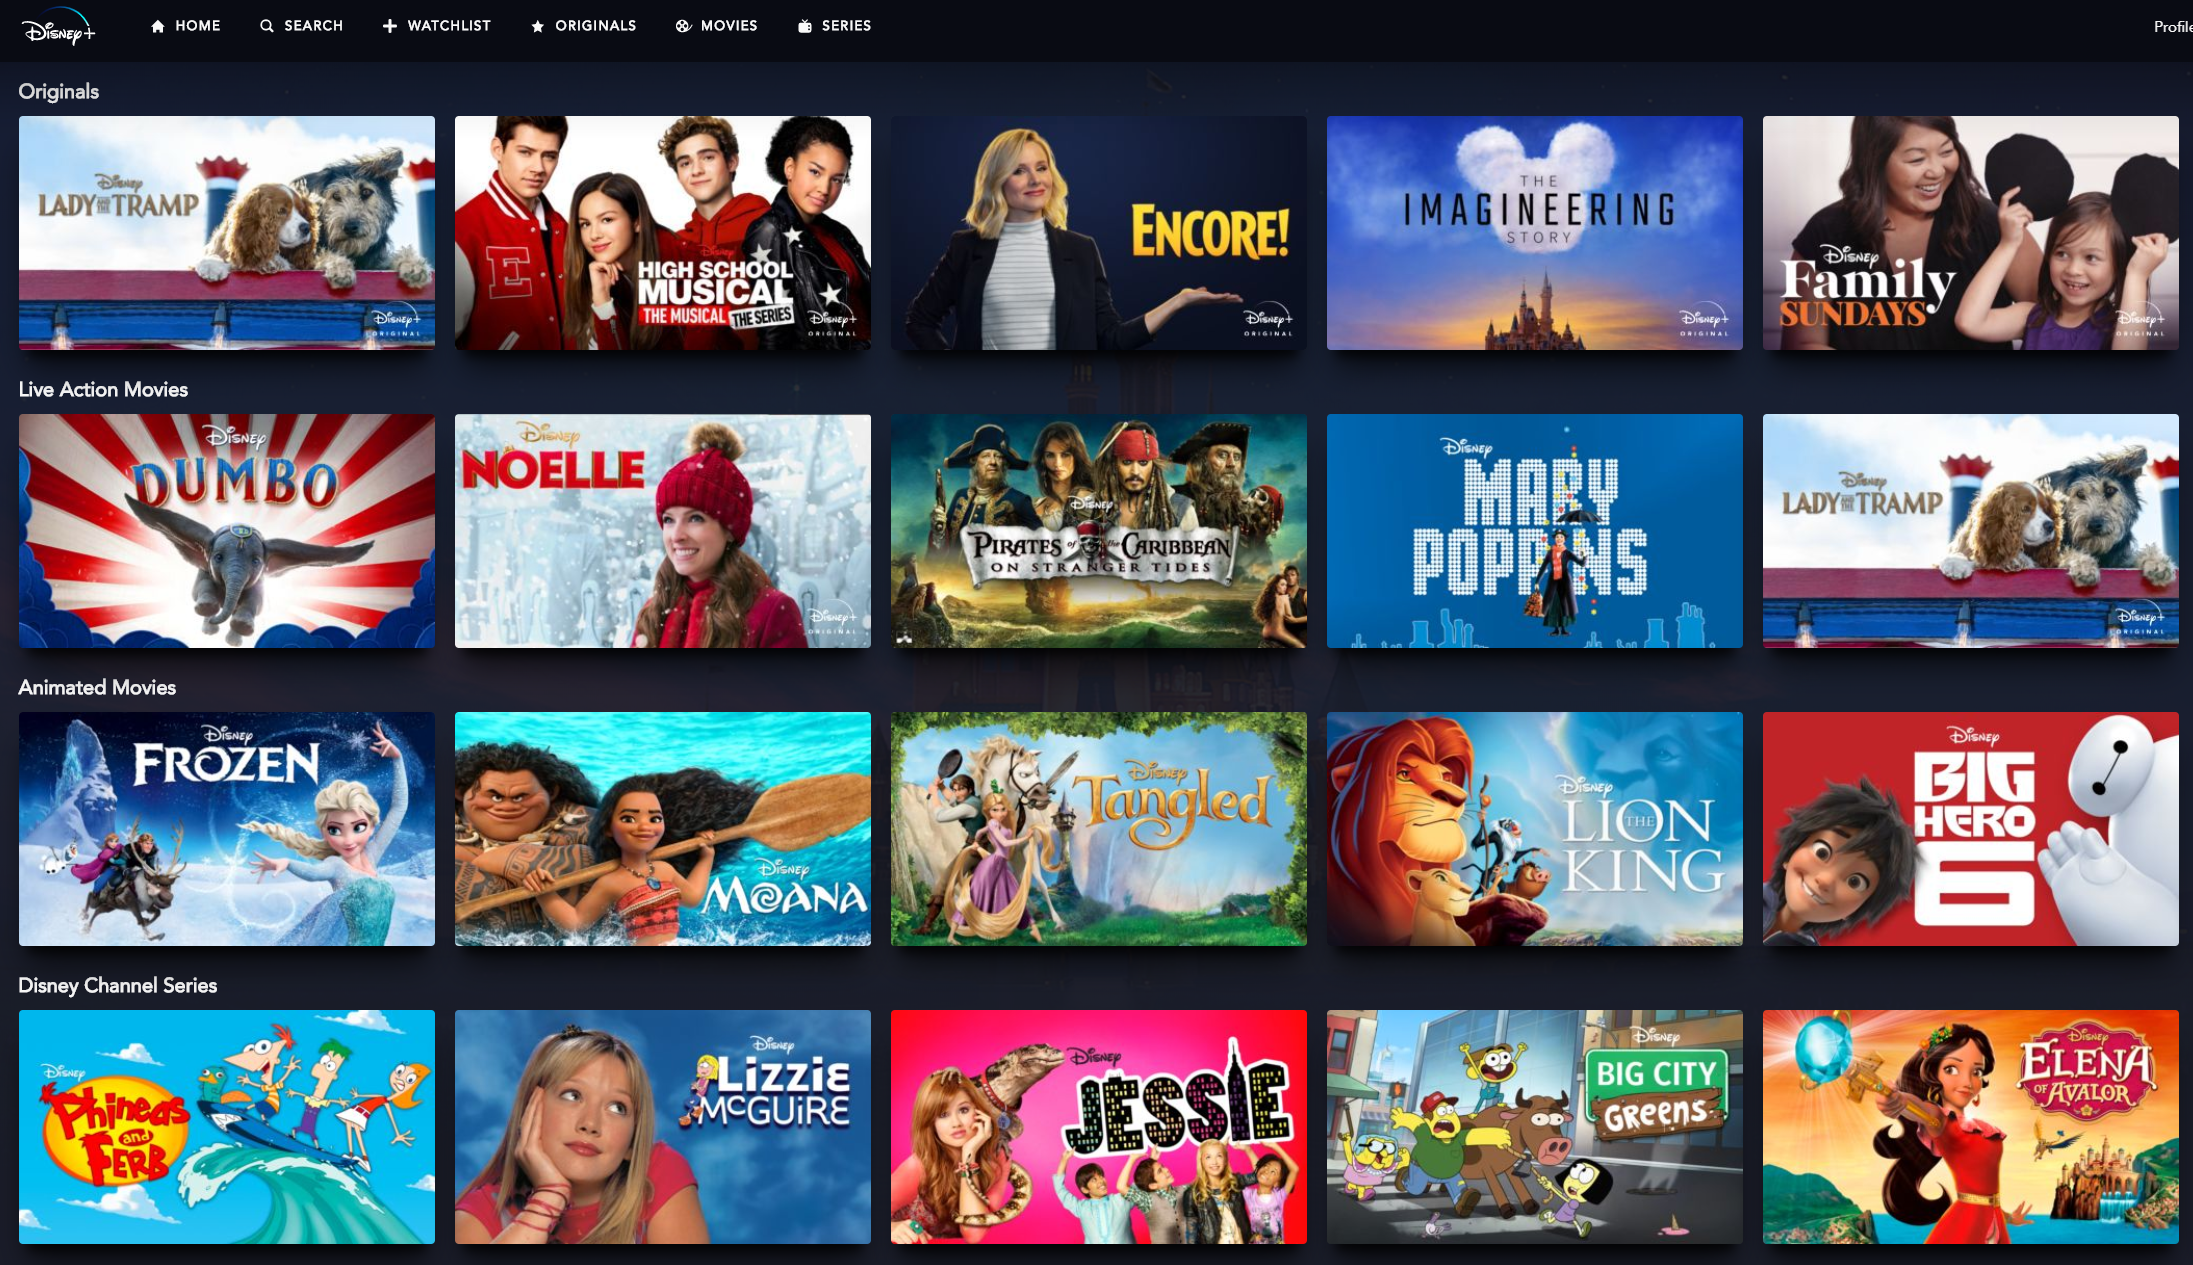 Best free trial streaming service options while stuck at home - Disney+